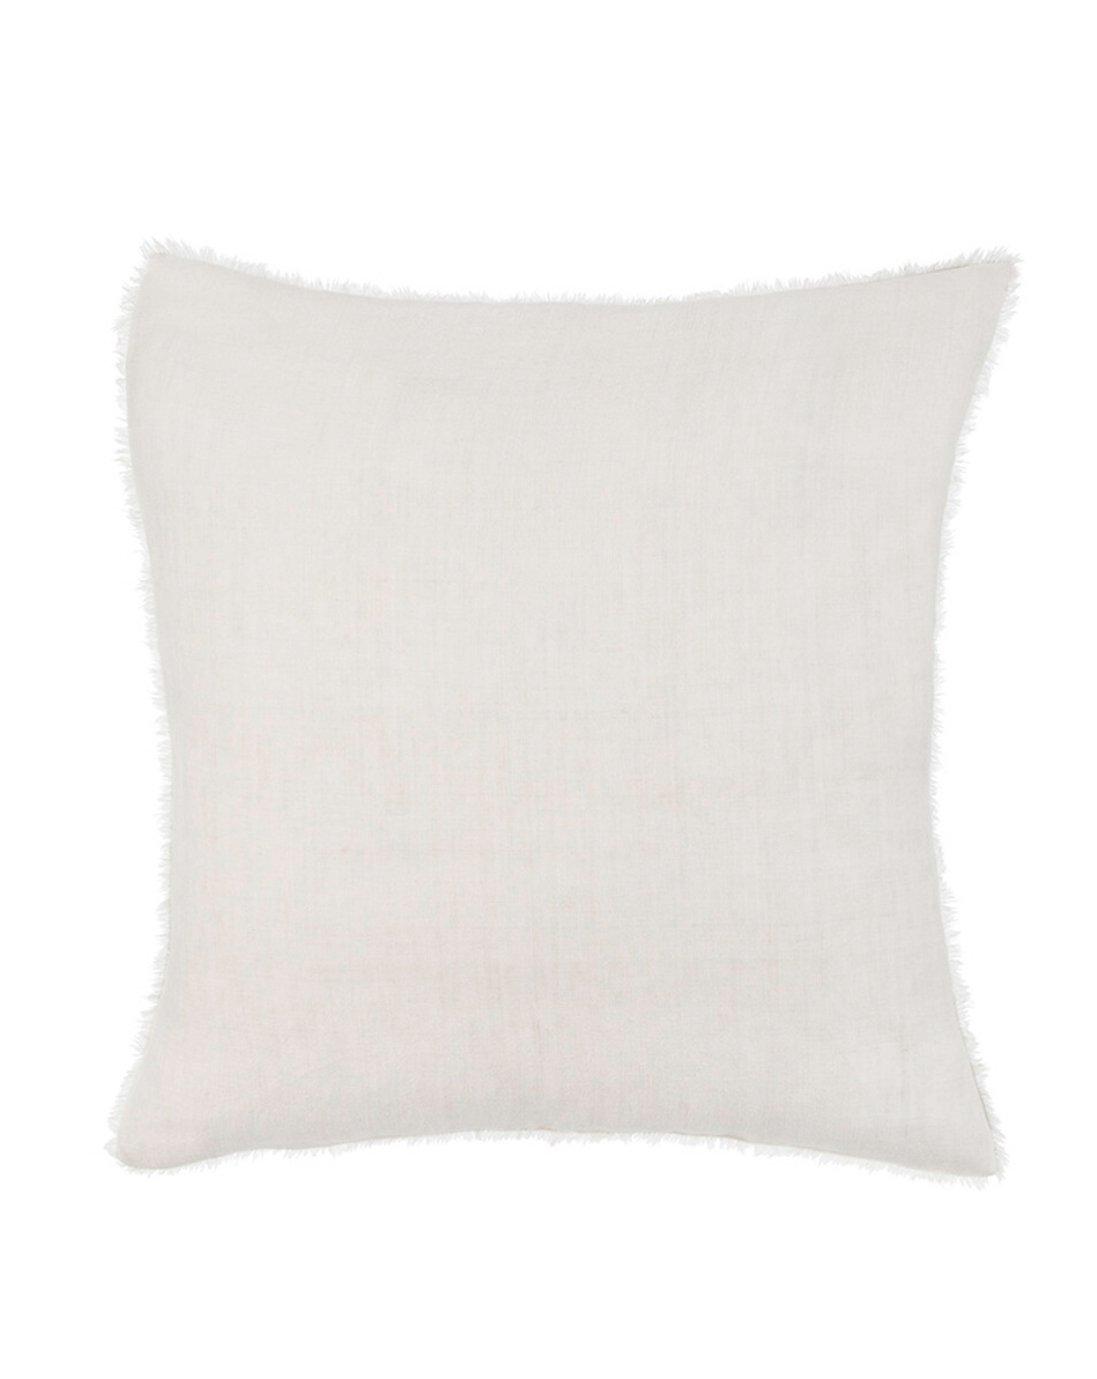 LINA LINEN PILLOW  - NATURAL WHITE living-decorative-object Indaba trading co   